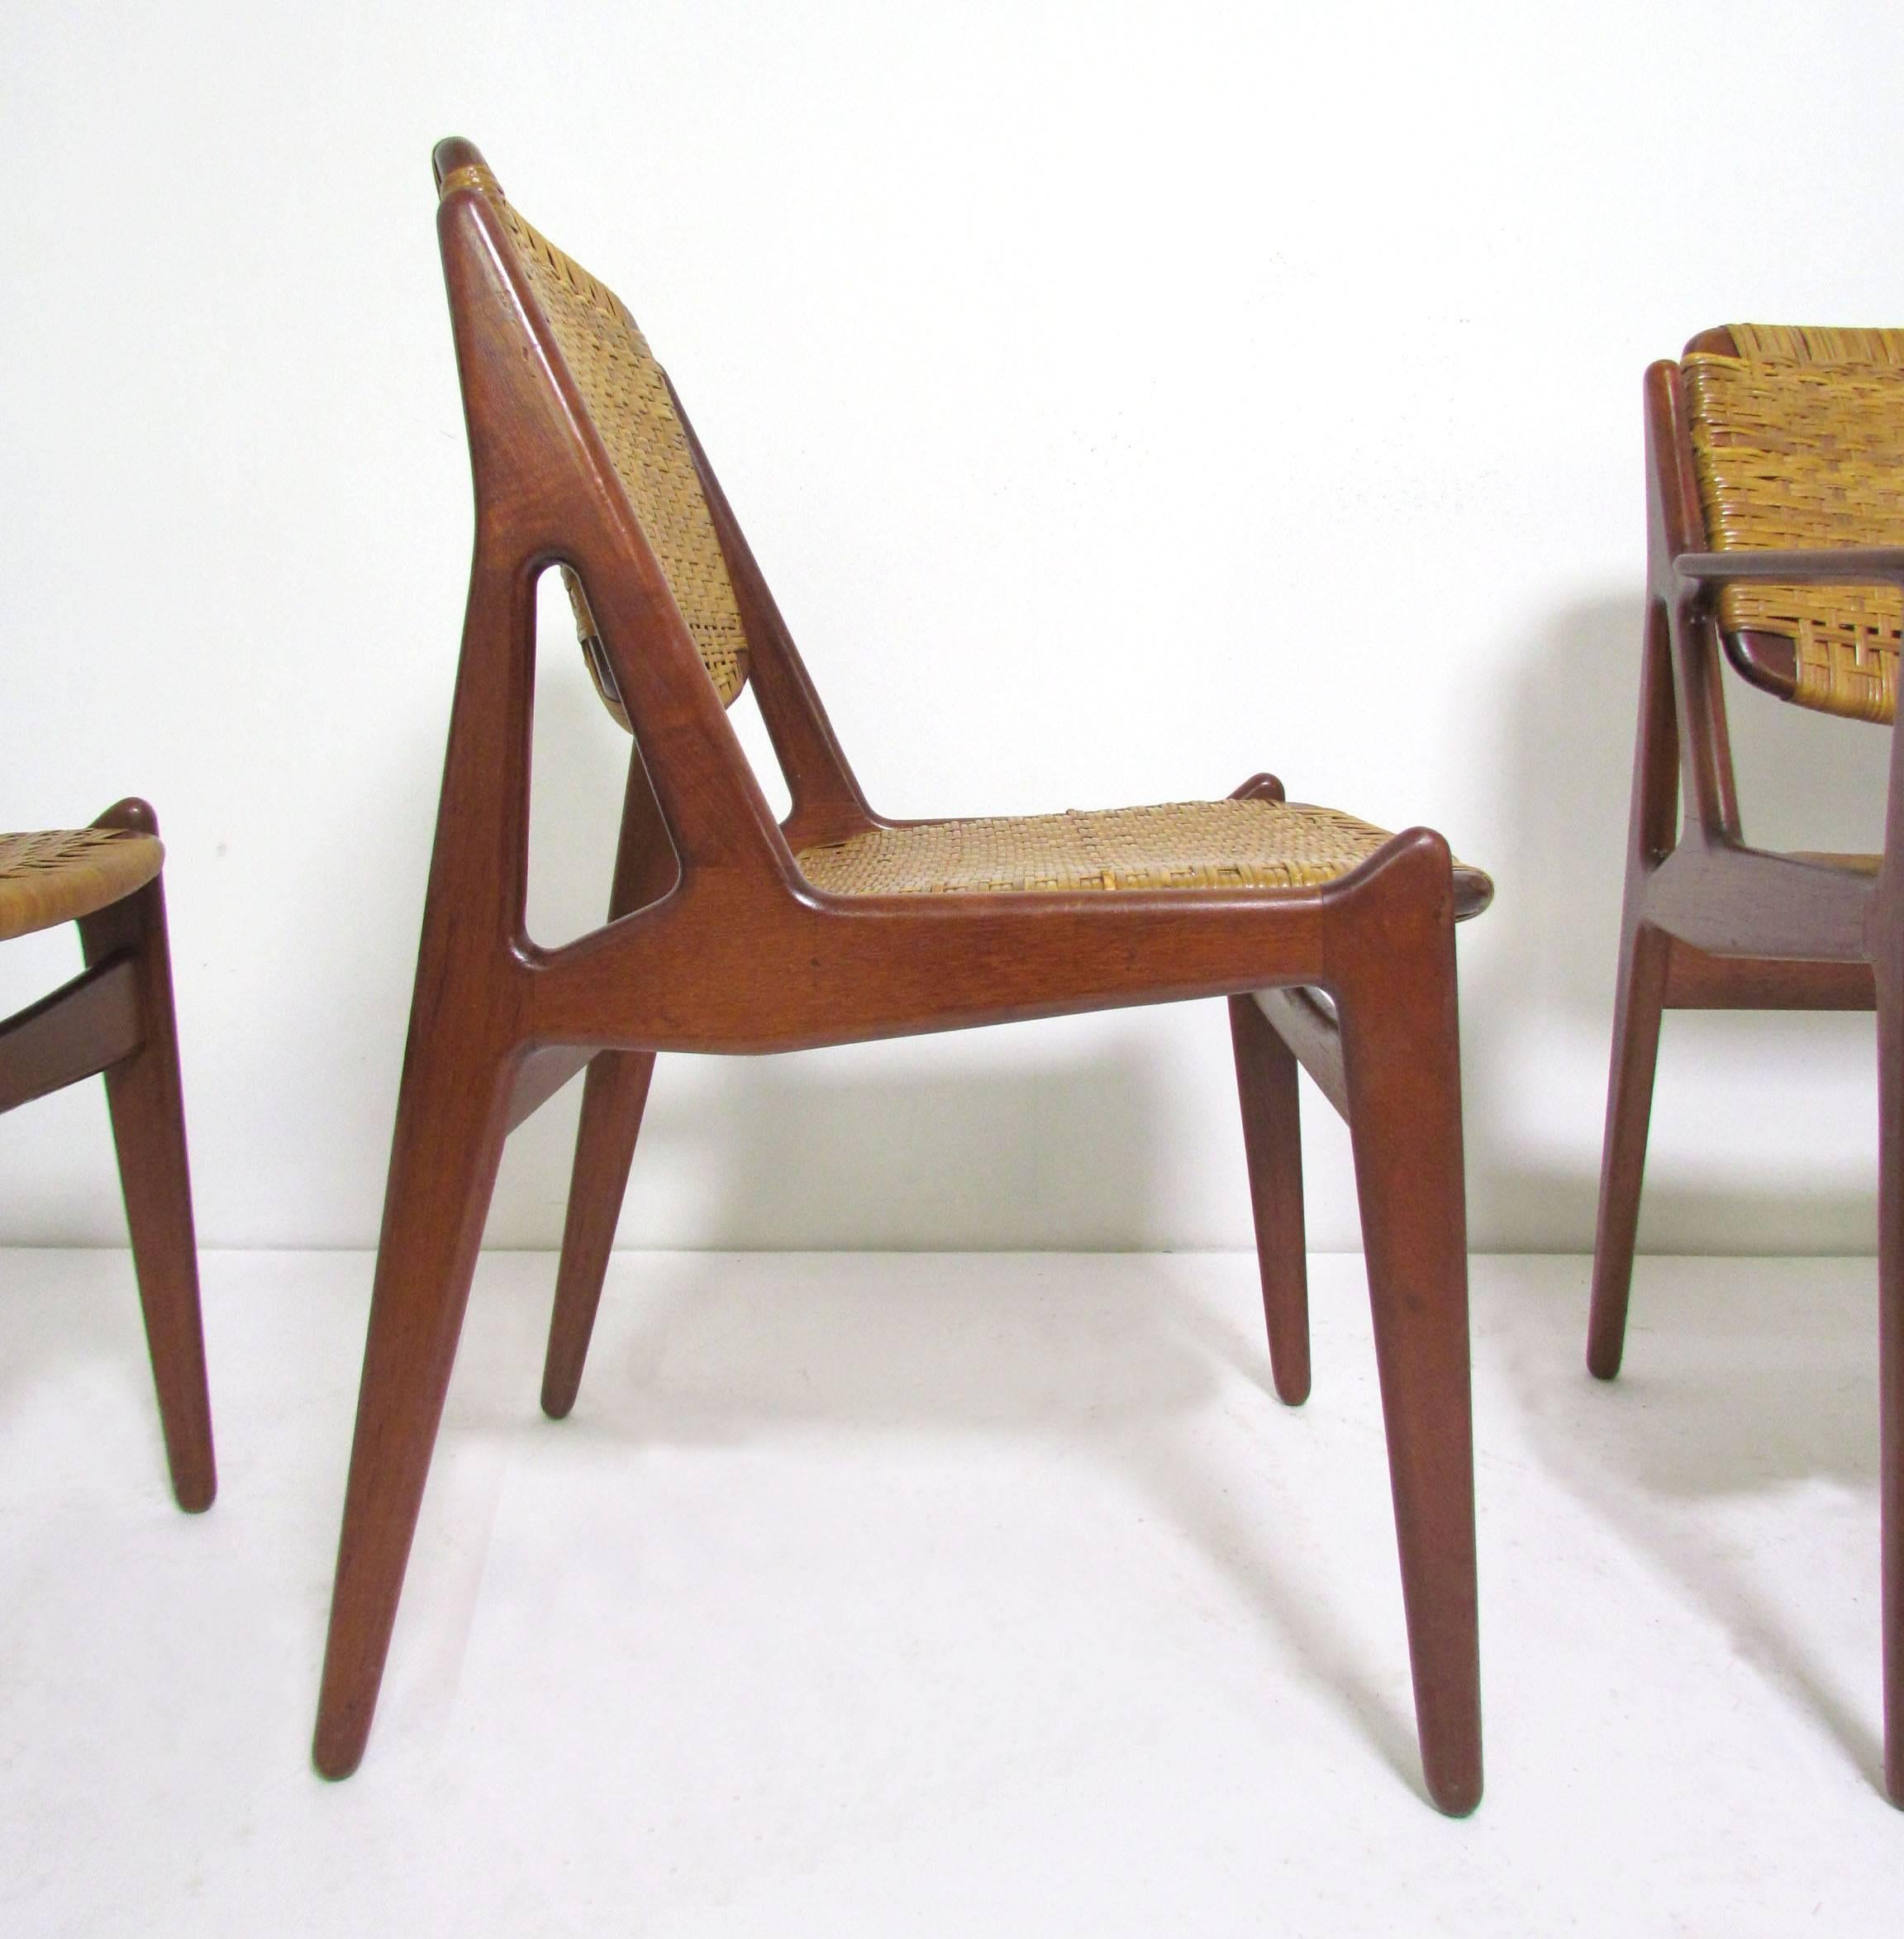 cane dining chairs for sale